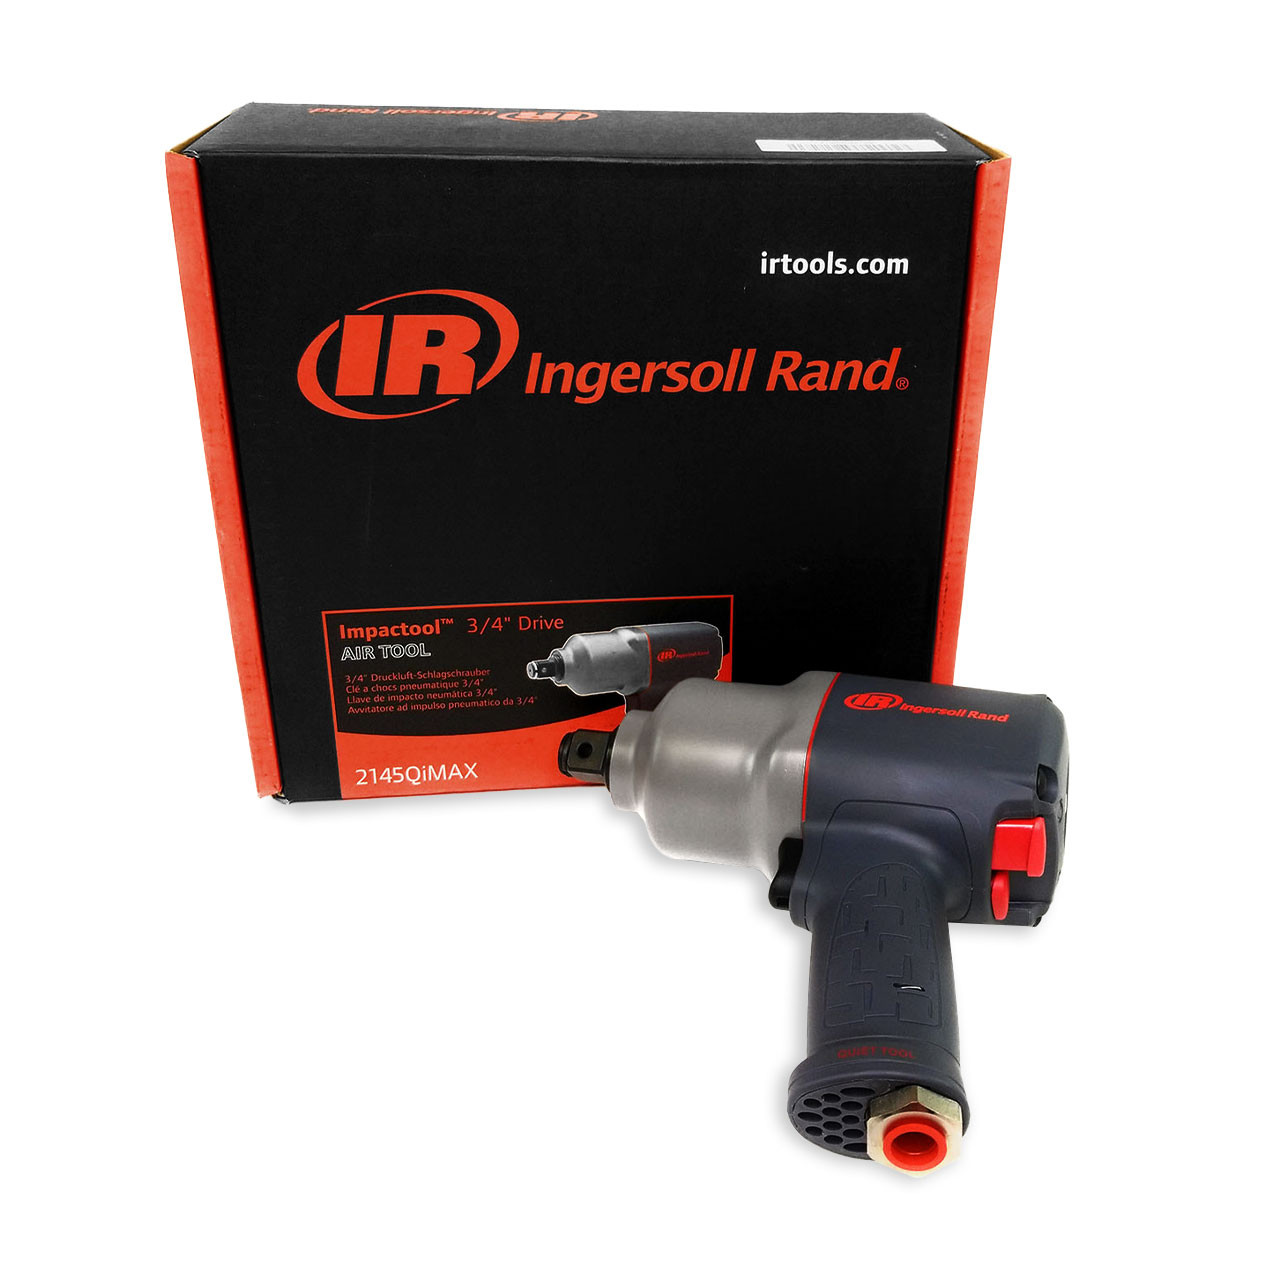 Ingersoll-Rand 3/4" Drive Impact Wrench 3